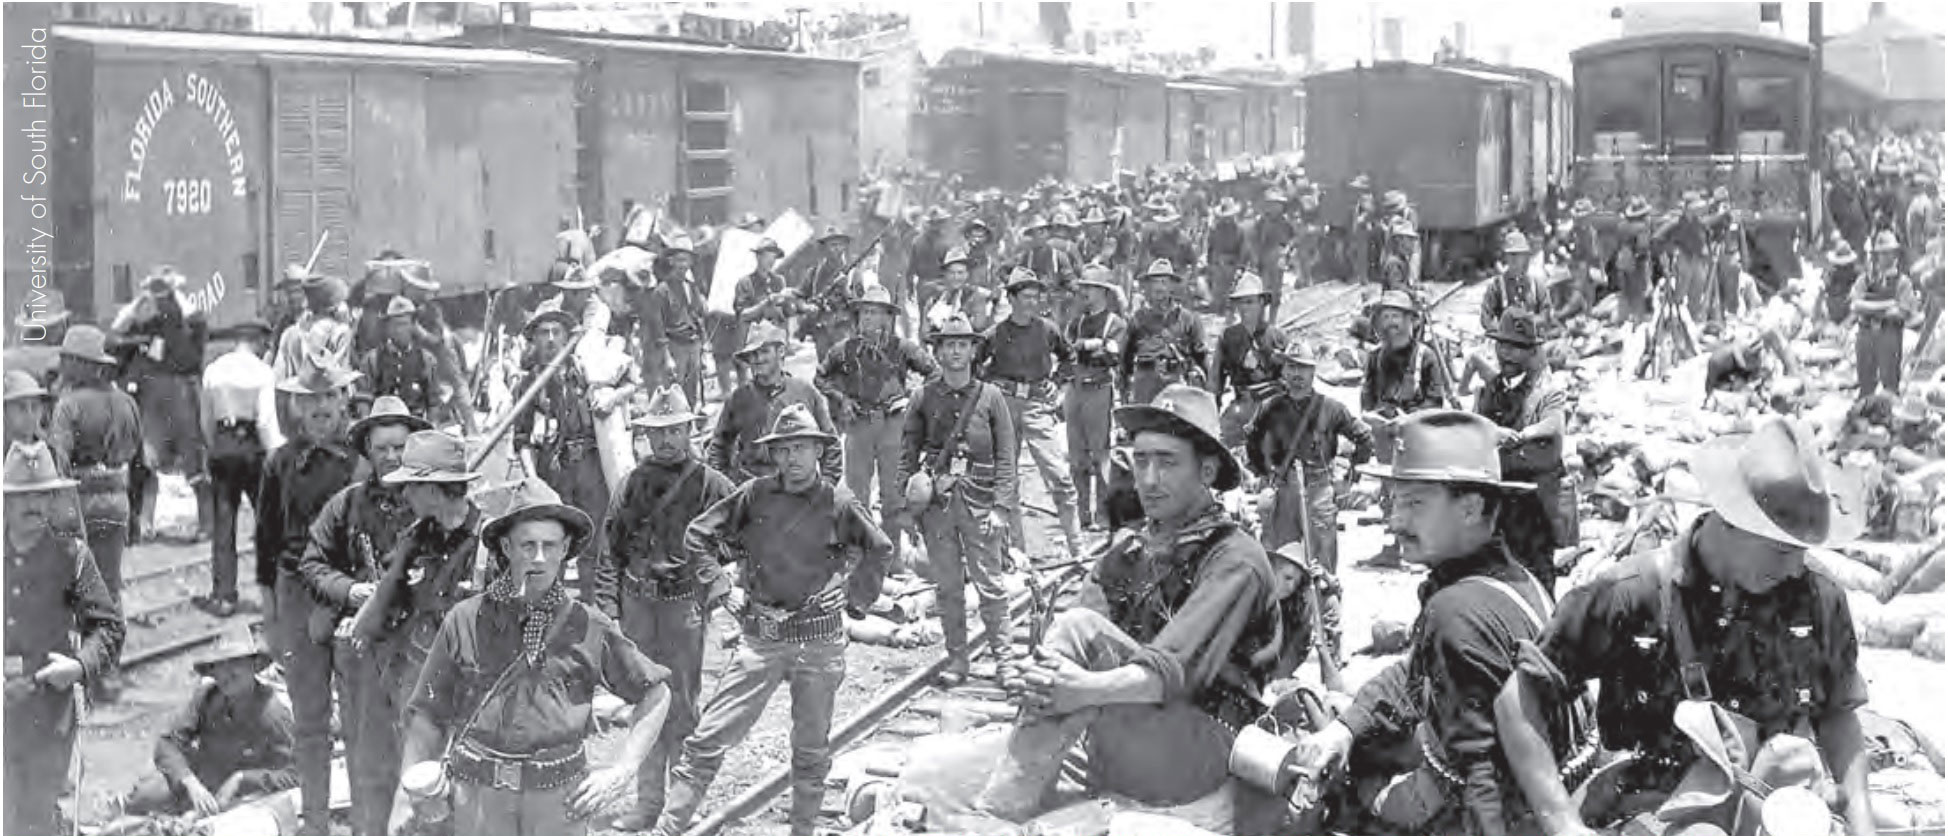  Soldiers of the 71st New York Volunteer Infantry wait with their gear at the port of Tampa. 